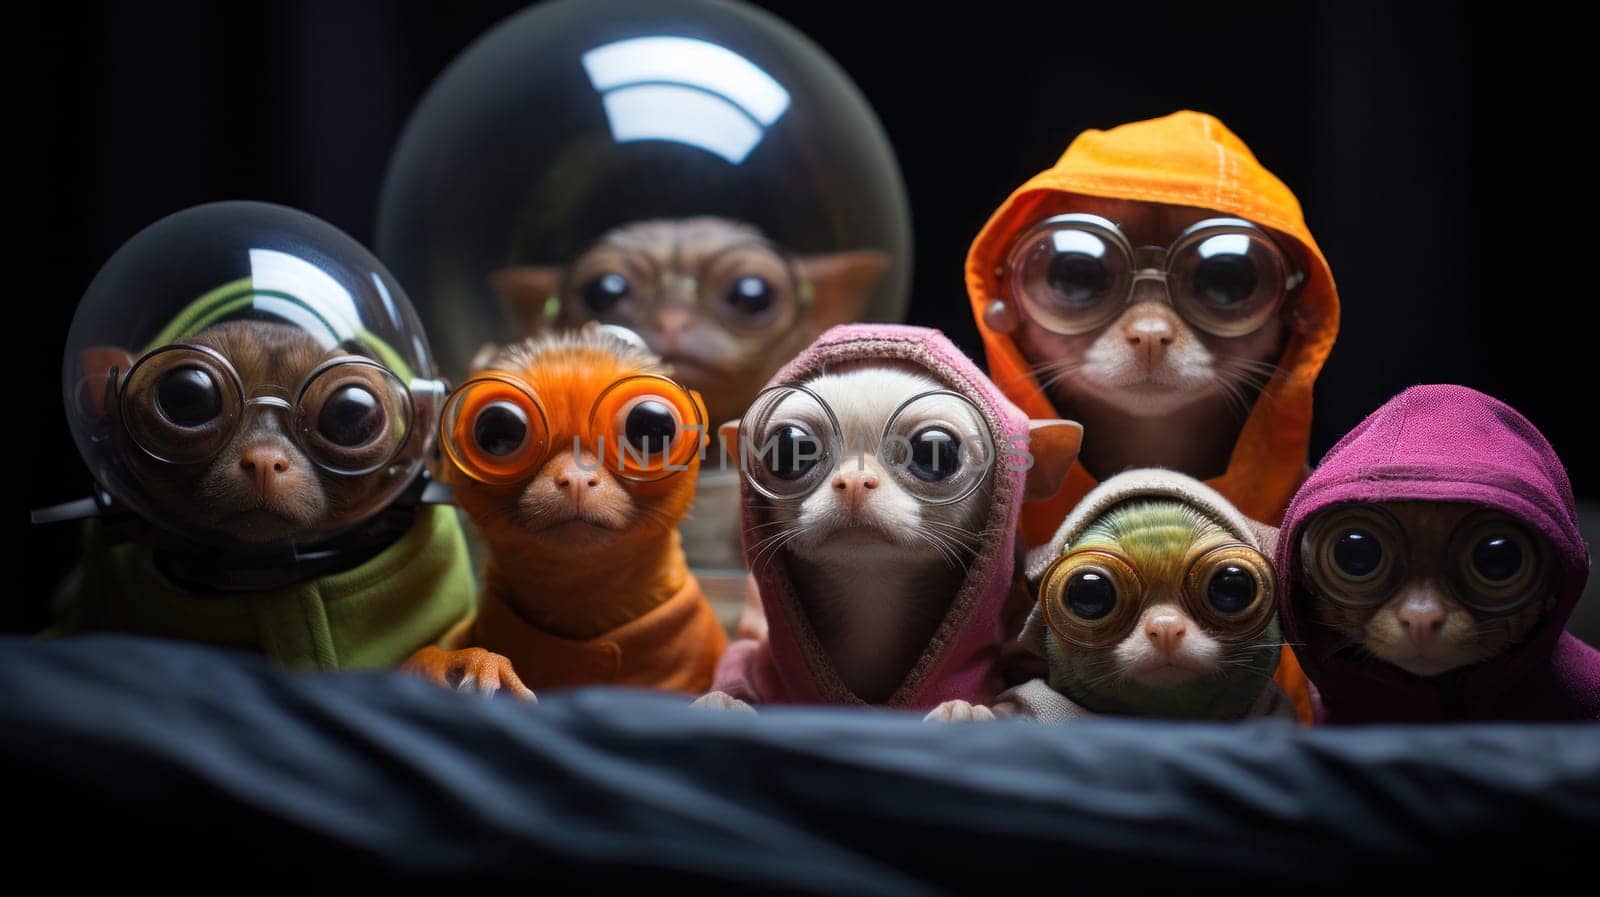 A group of small animals wearing hoods and goggles are sitting together